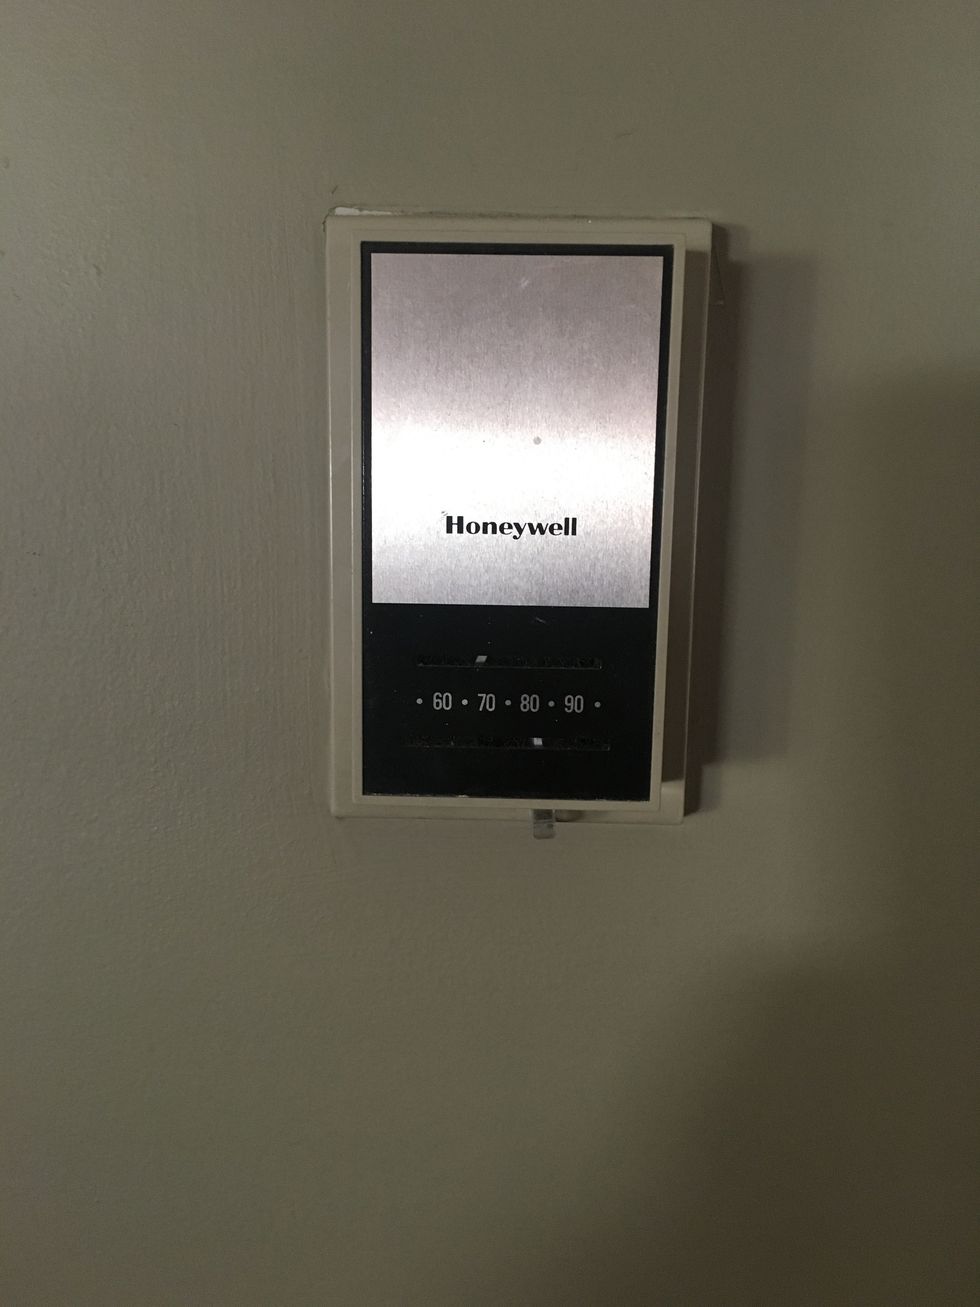 Honeywell Thermostat without a C-Wire